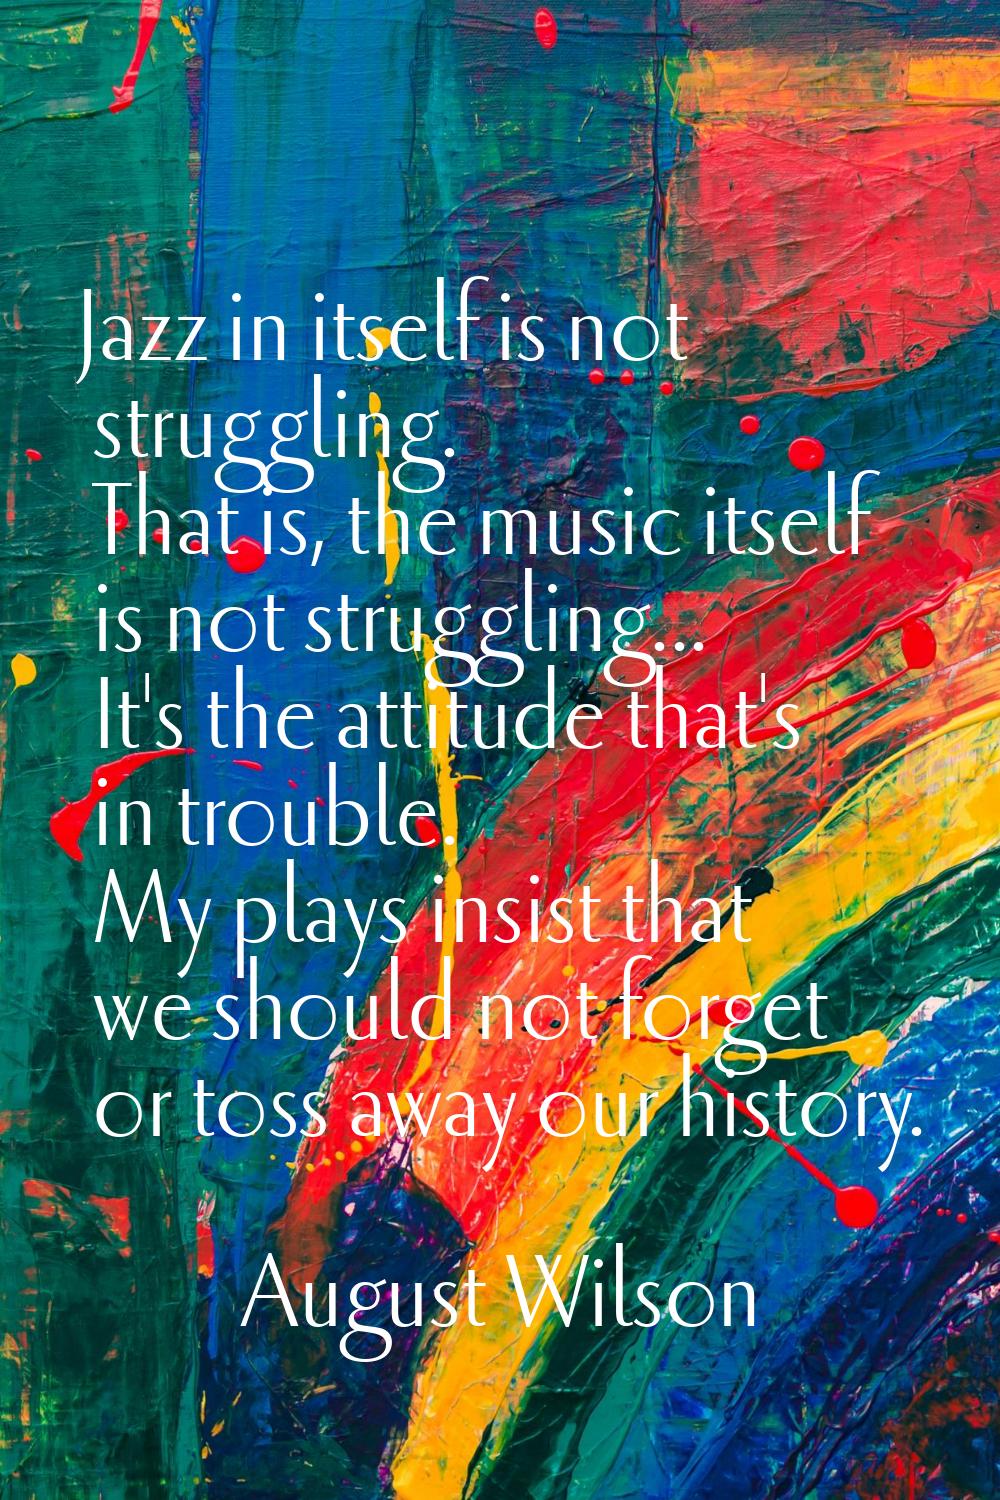 Jazz in itself is not struggling. That is, the music itself is not struggling... It's the attitude 